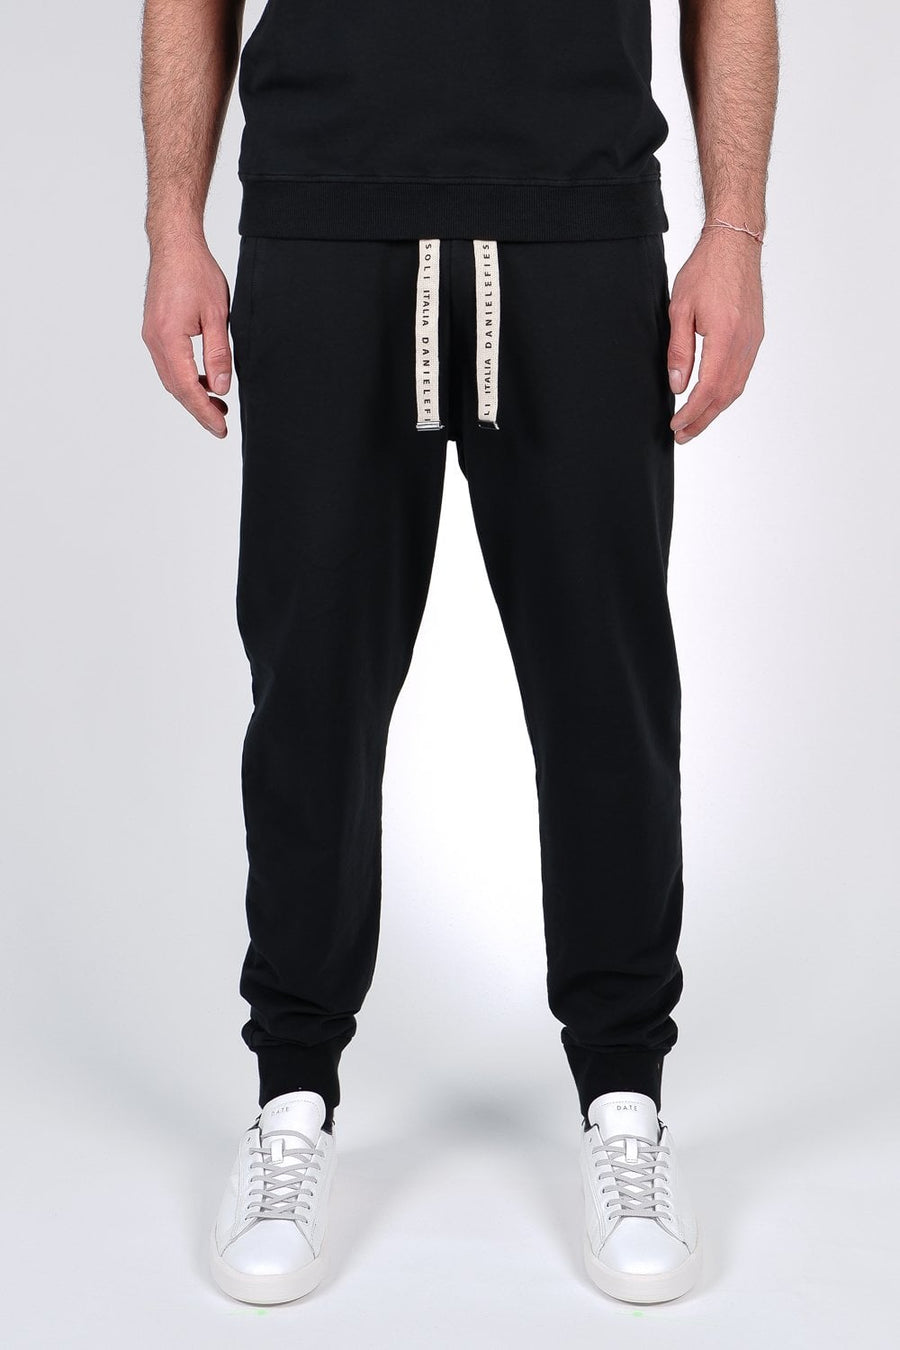 Buy the Daniele Fiesoli Jersey Joggers in Black at Intro. Spend £50 for free UK delivery. Official stockists. We ship worldwide.